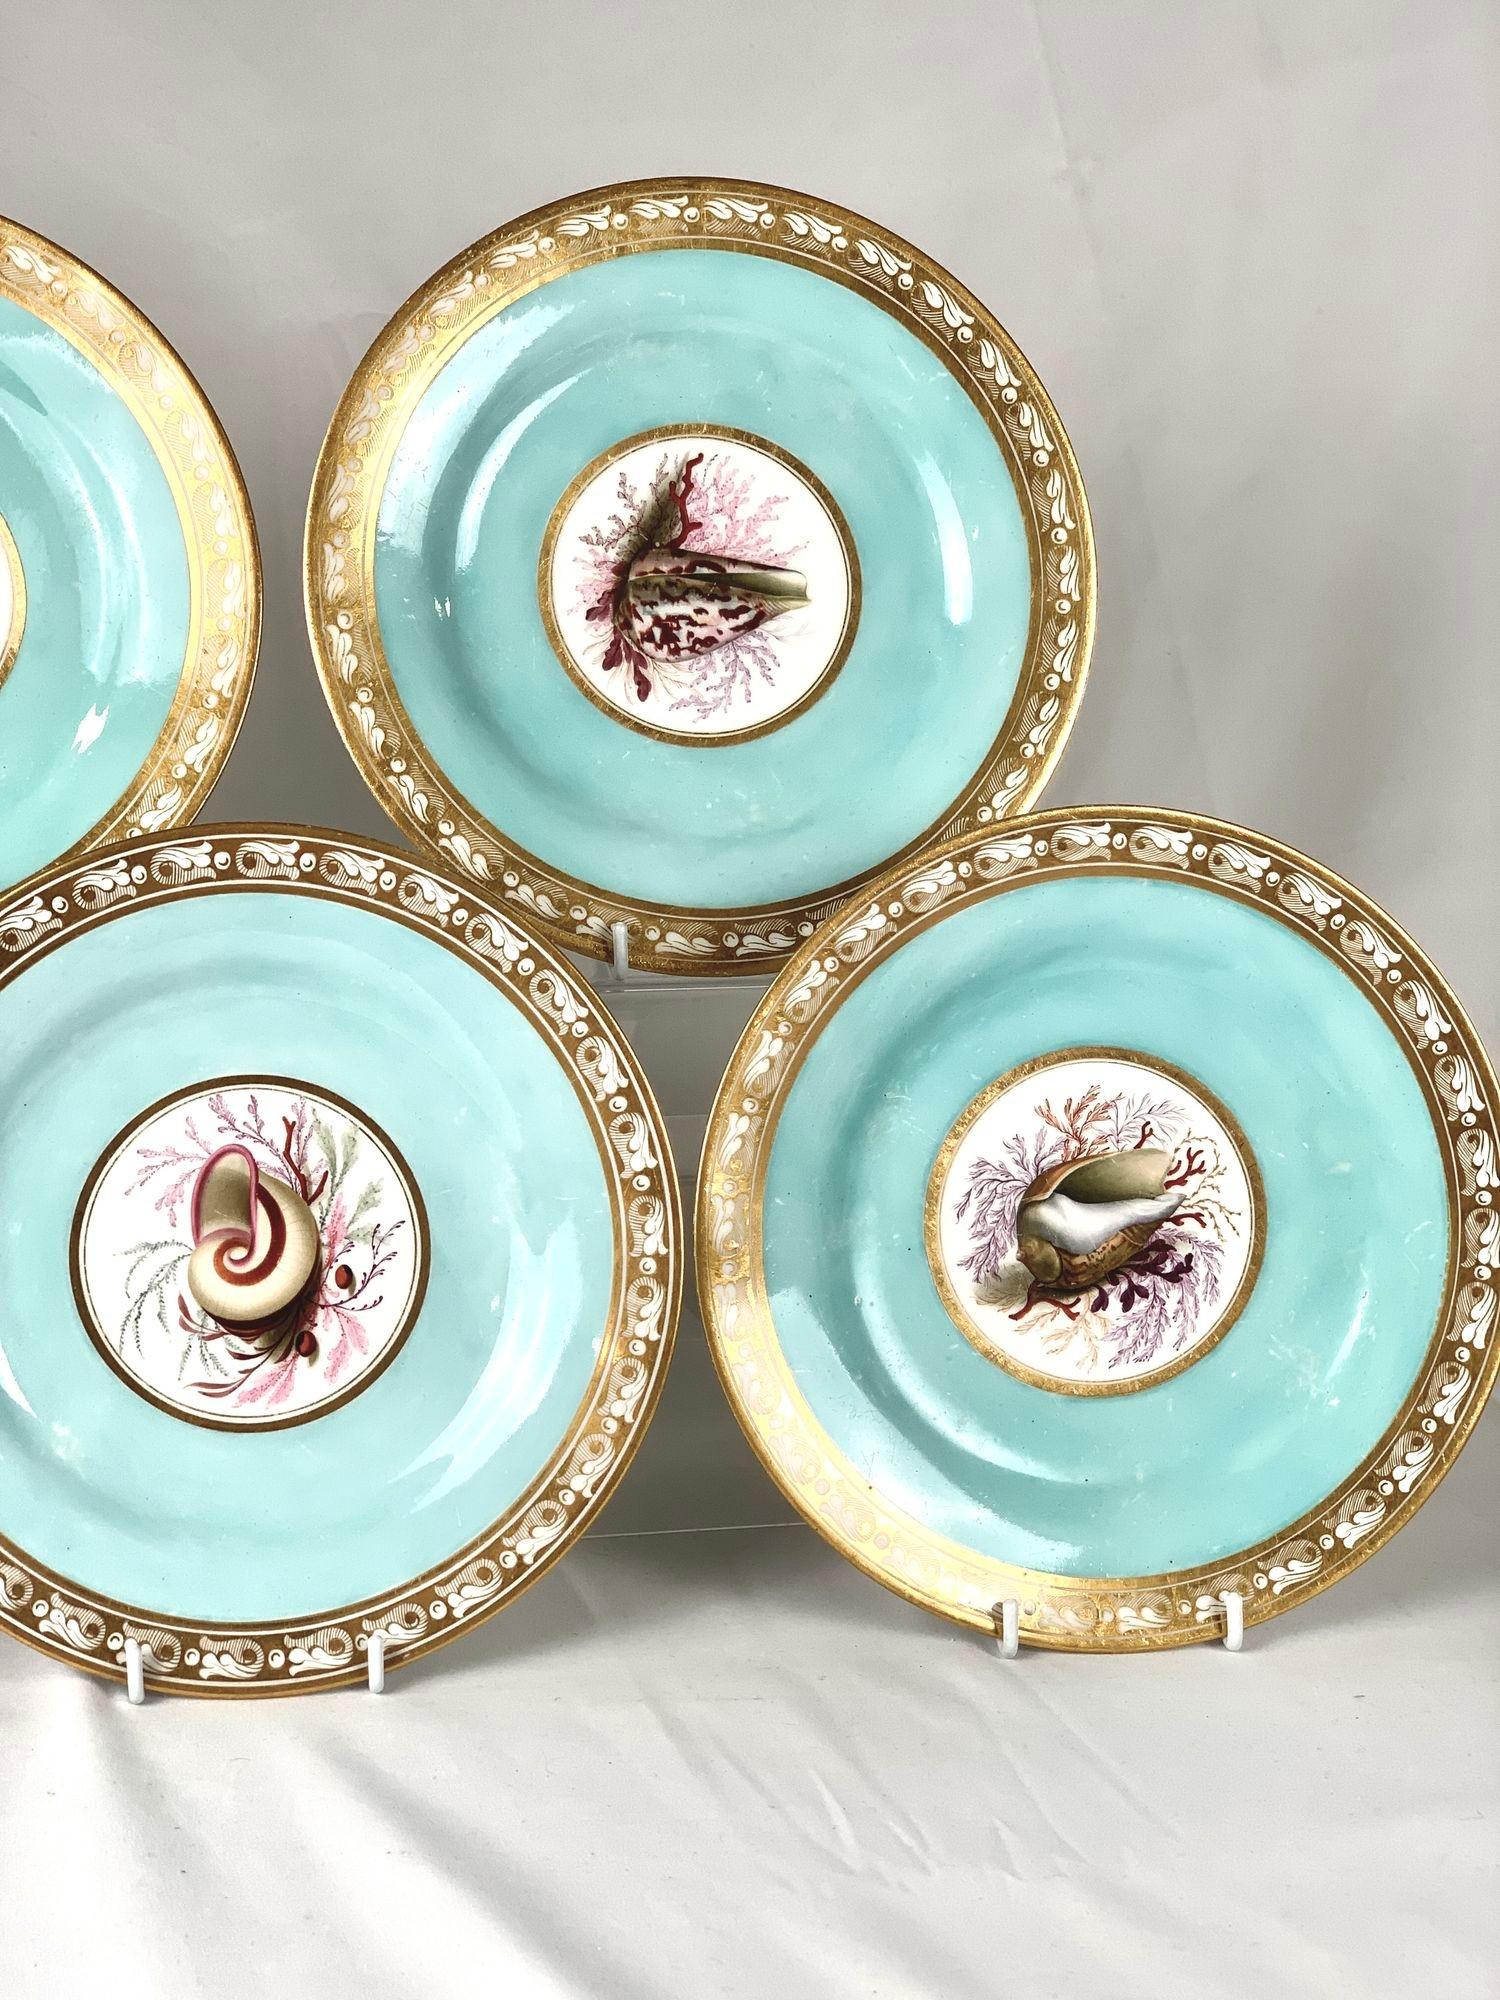 Hand Painted Shell Decorated Worcester Plates Set of 5 Flight Barr Barr C-1820 In Excellent Condition For Sale In Katonah, NY